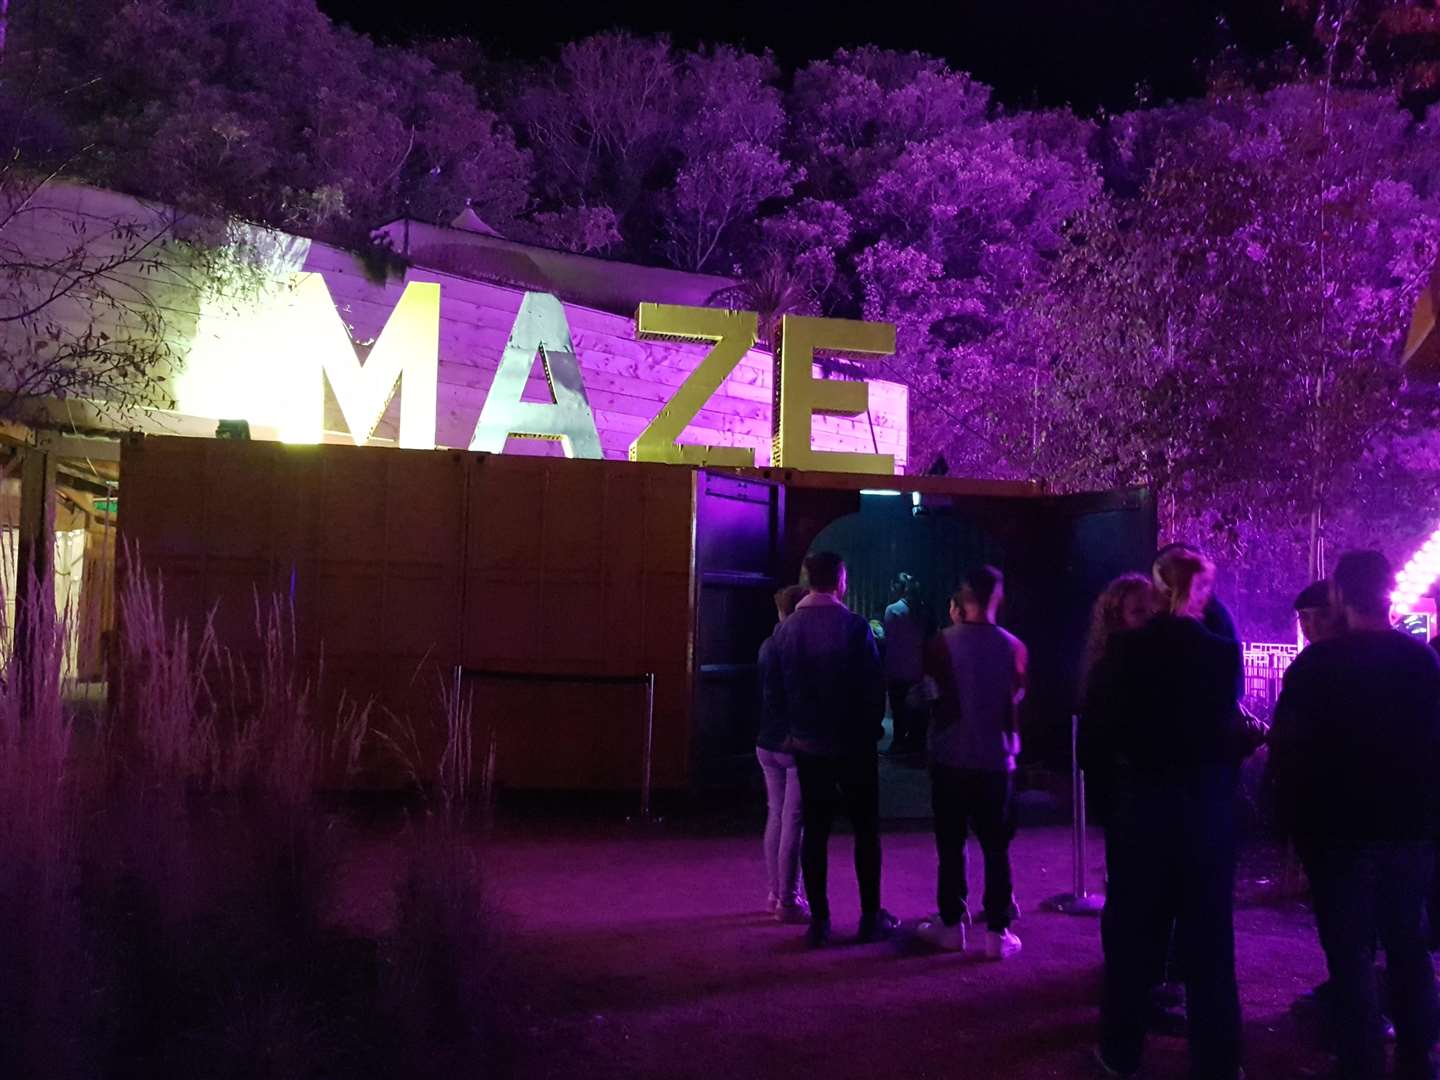 Guests queue for the Upside Down maze